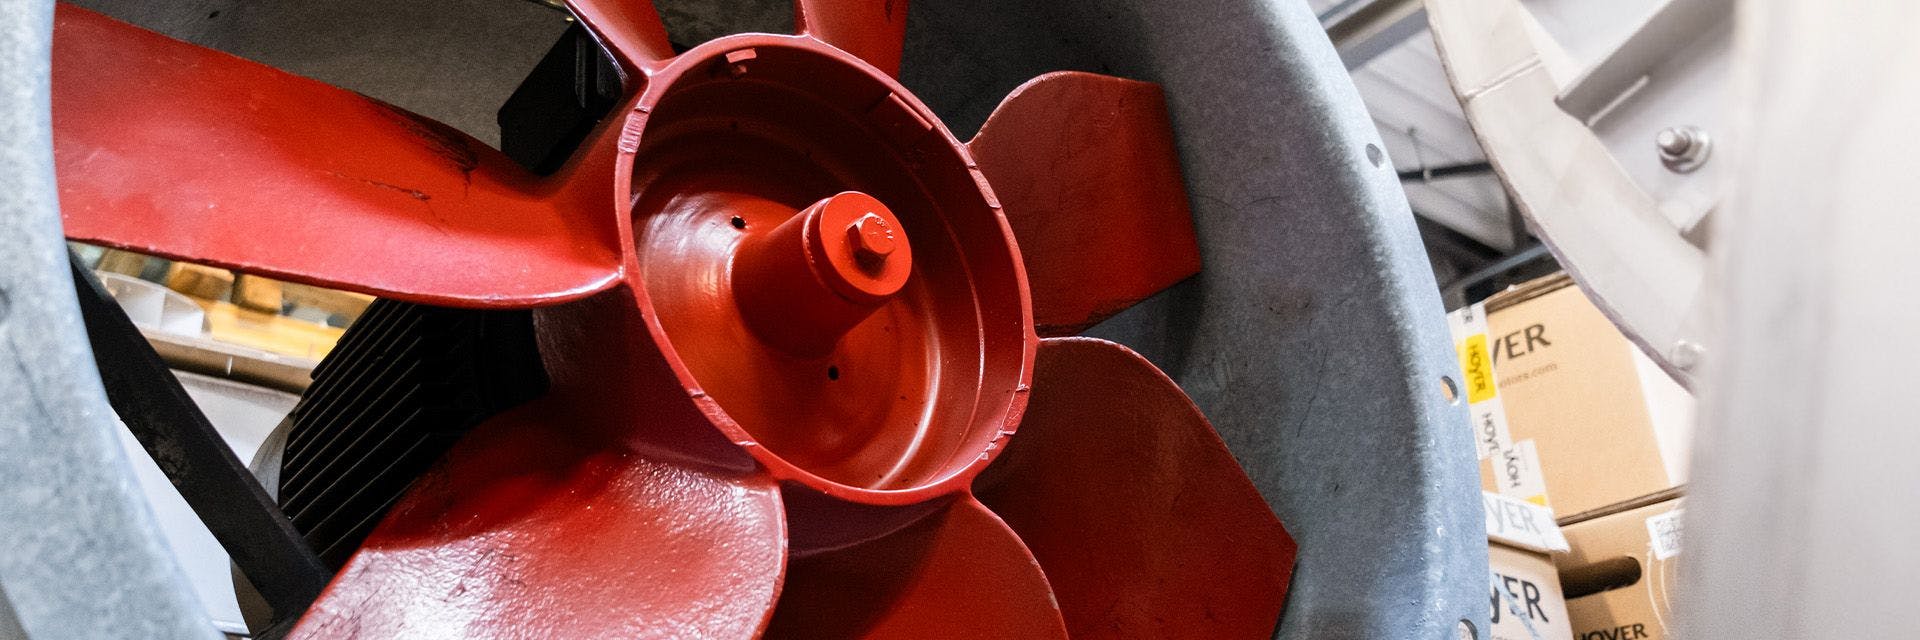 Close up of red axial fan